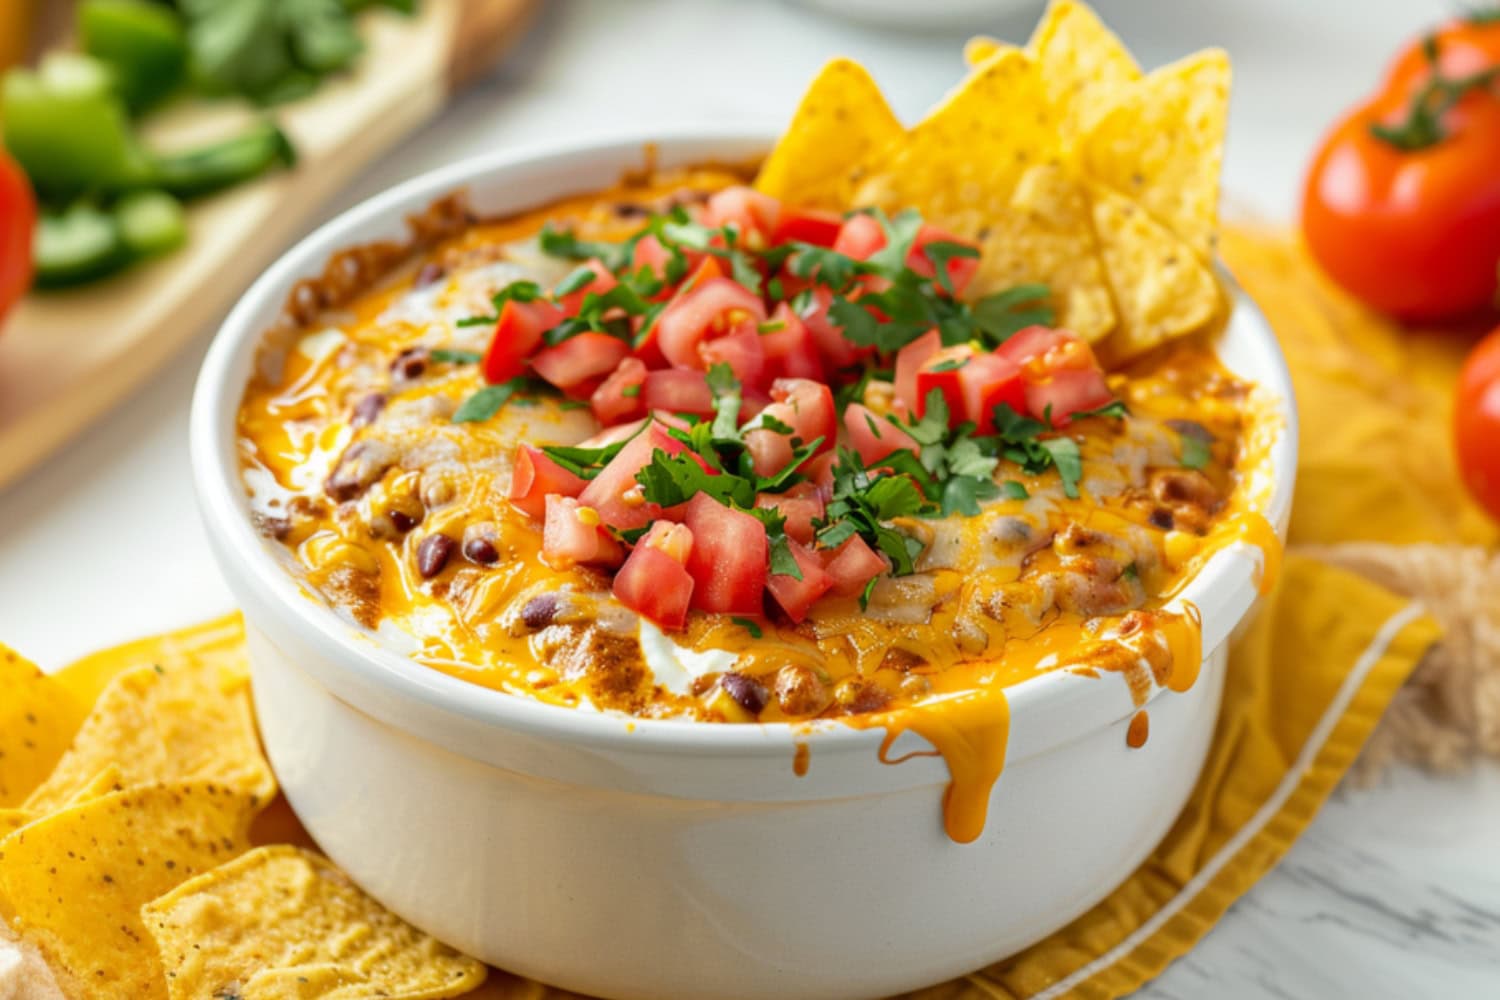 Bowl of chili cheese dip with tortillas and chopped tomatoes.